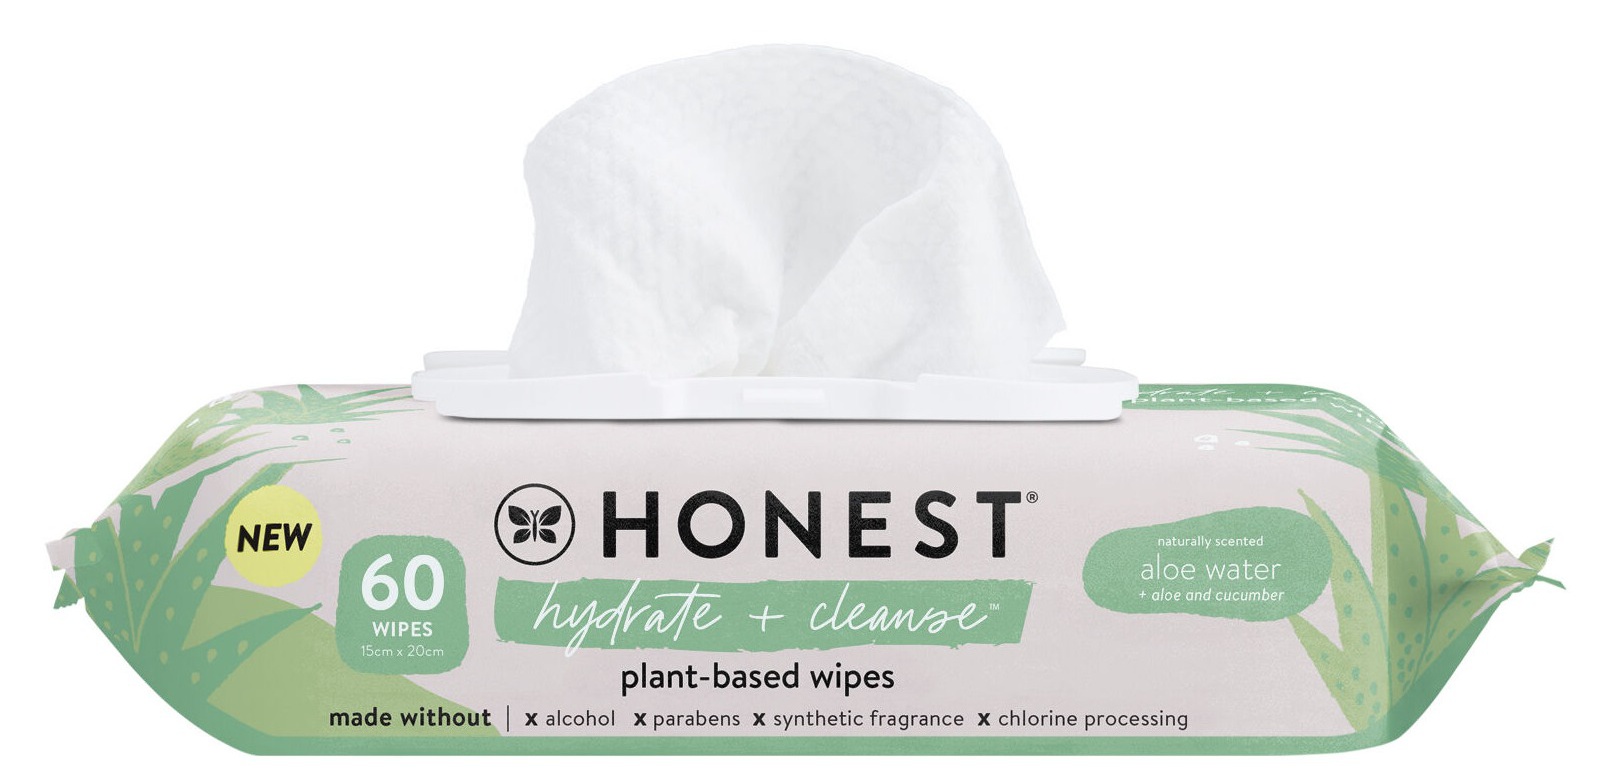 The Honest Company Hydrate + Cleanse Benefit Wipes